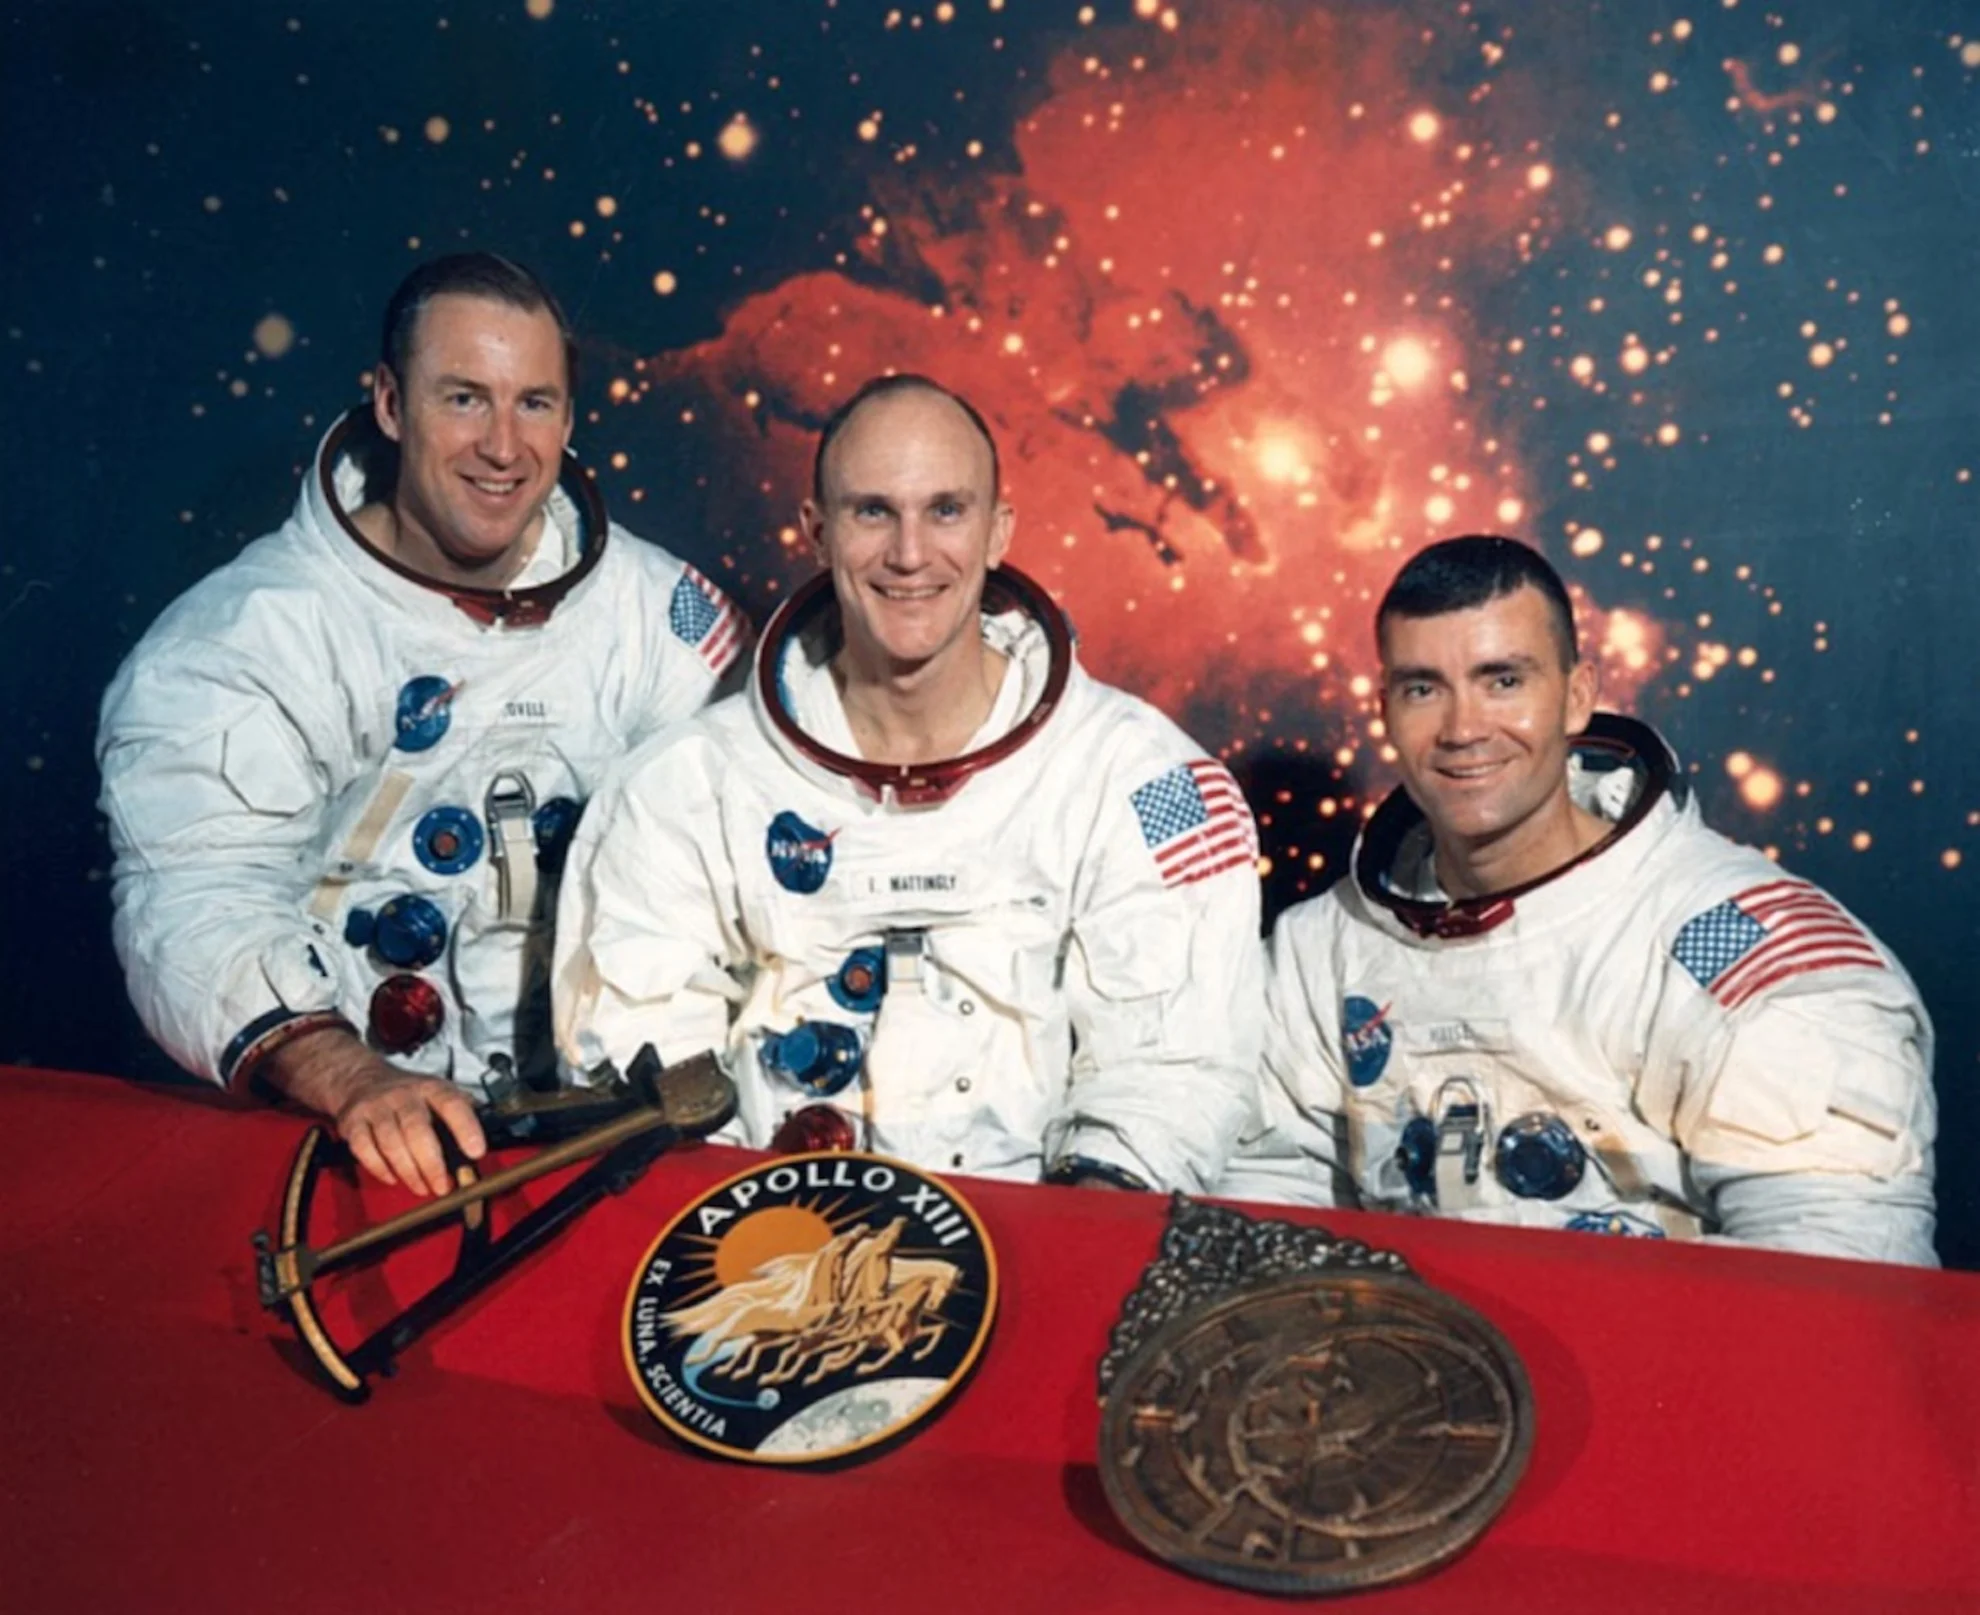 Recalling the error of the Apollo 13 mission on the anniversary of its launch